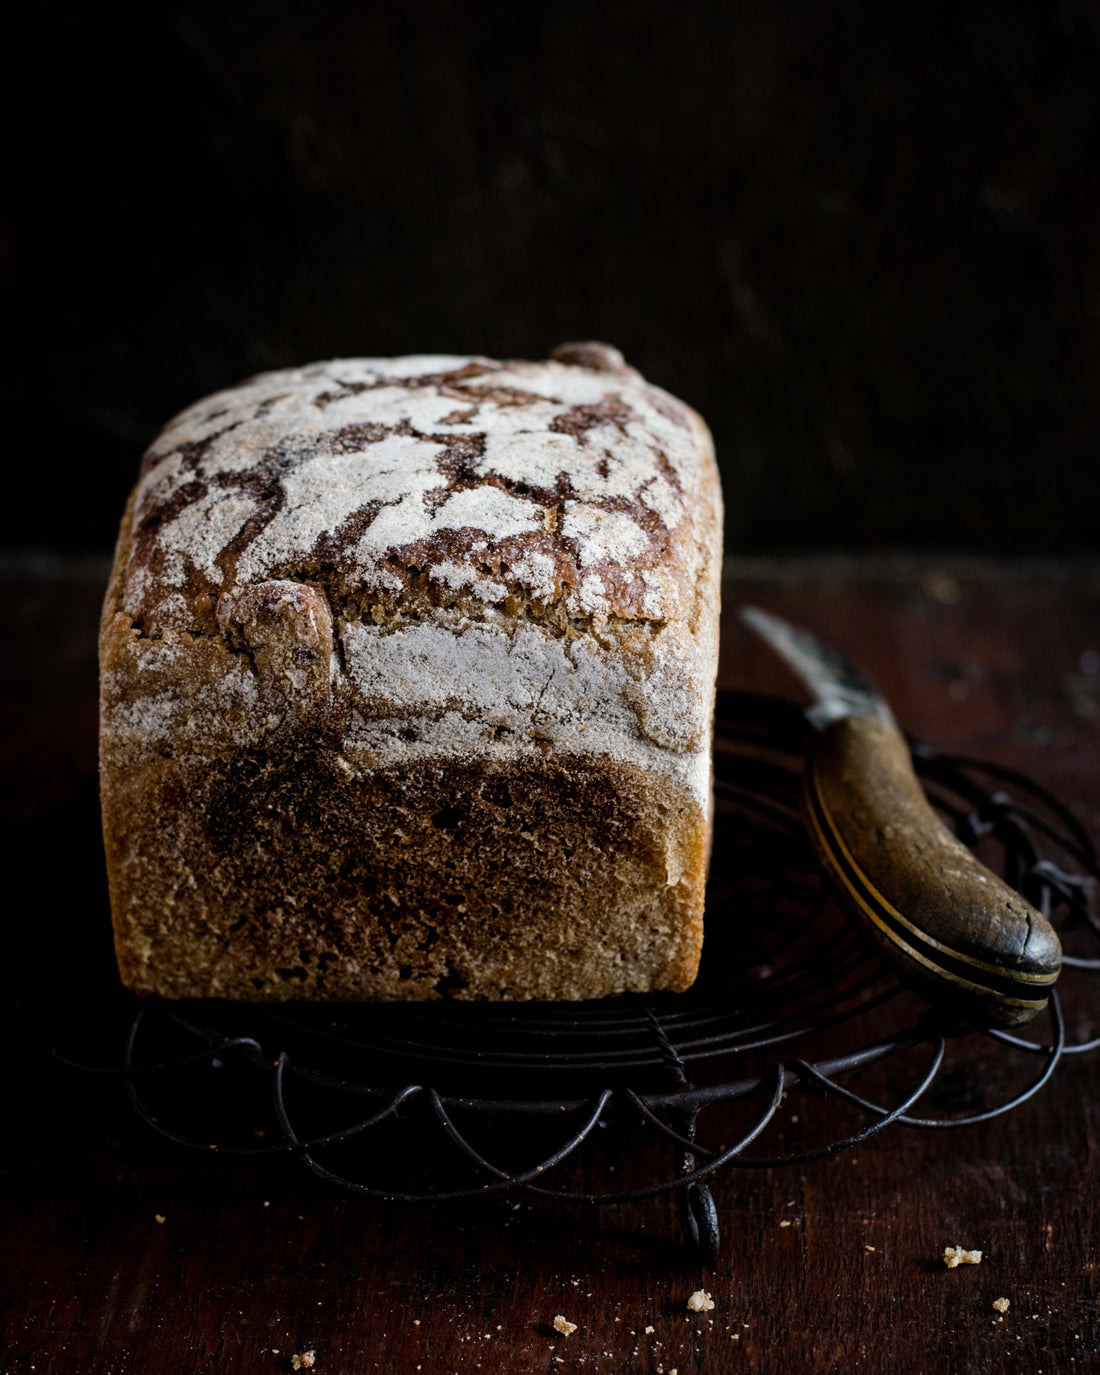 Lough Erne Resort’s Executive Chef Noel McMeel shares his recipe for Guinness Treacle bread